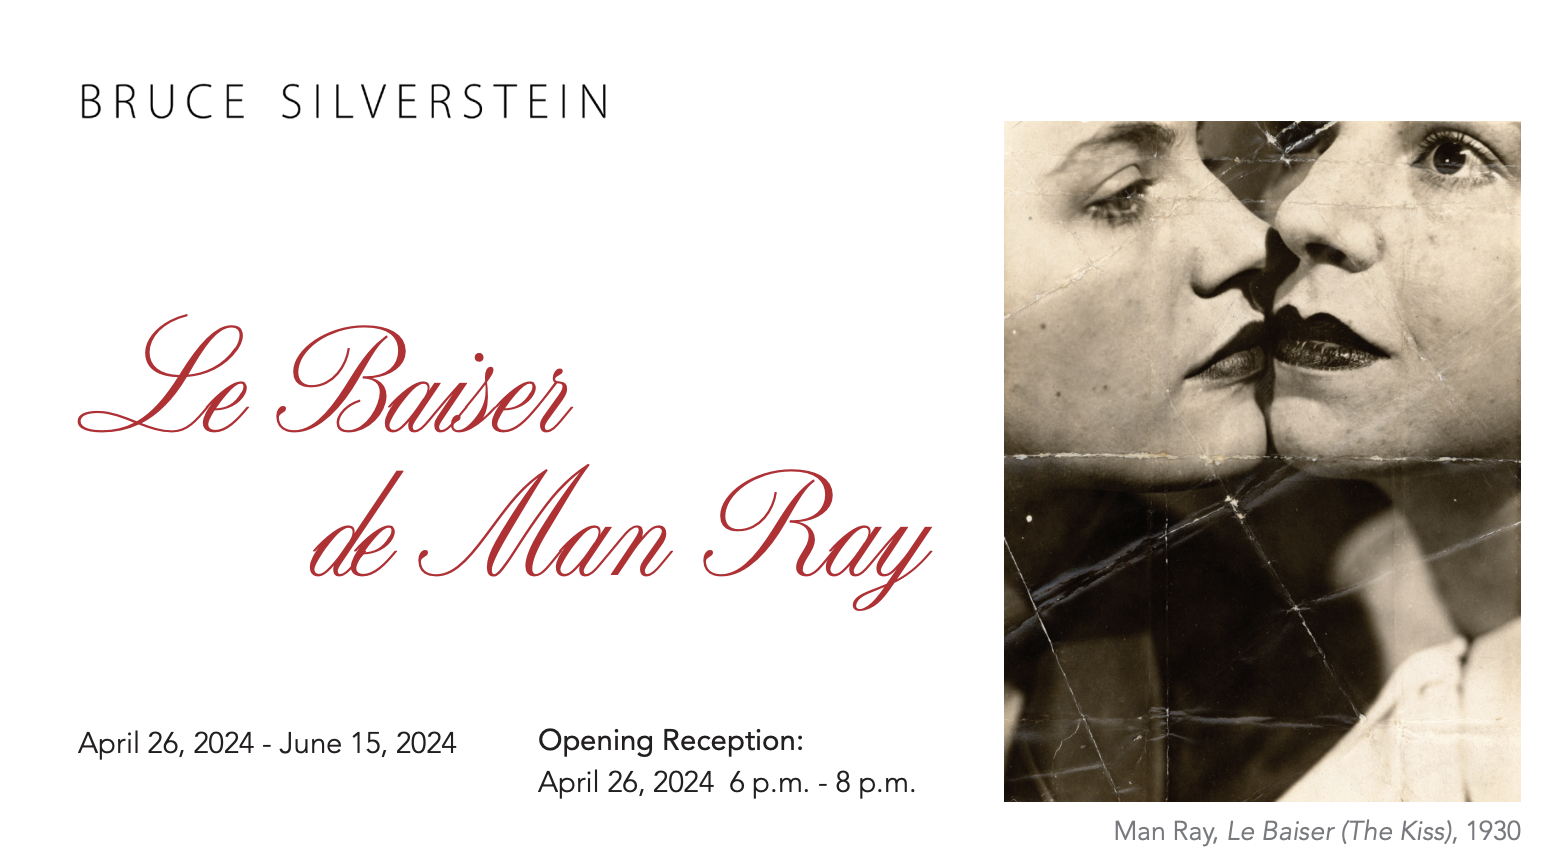 Man Ray Resdiscovered in NYC: “Le Baiser de Man Ray”